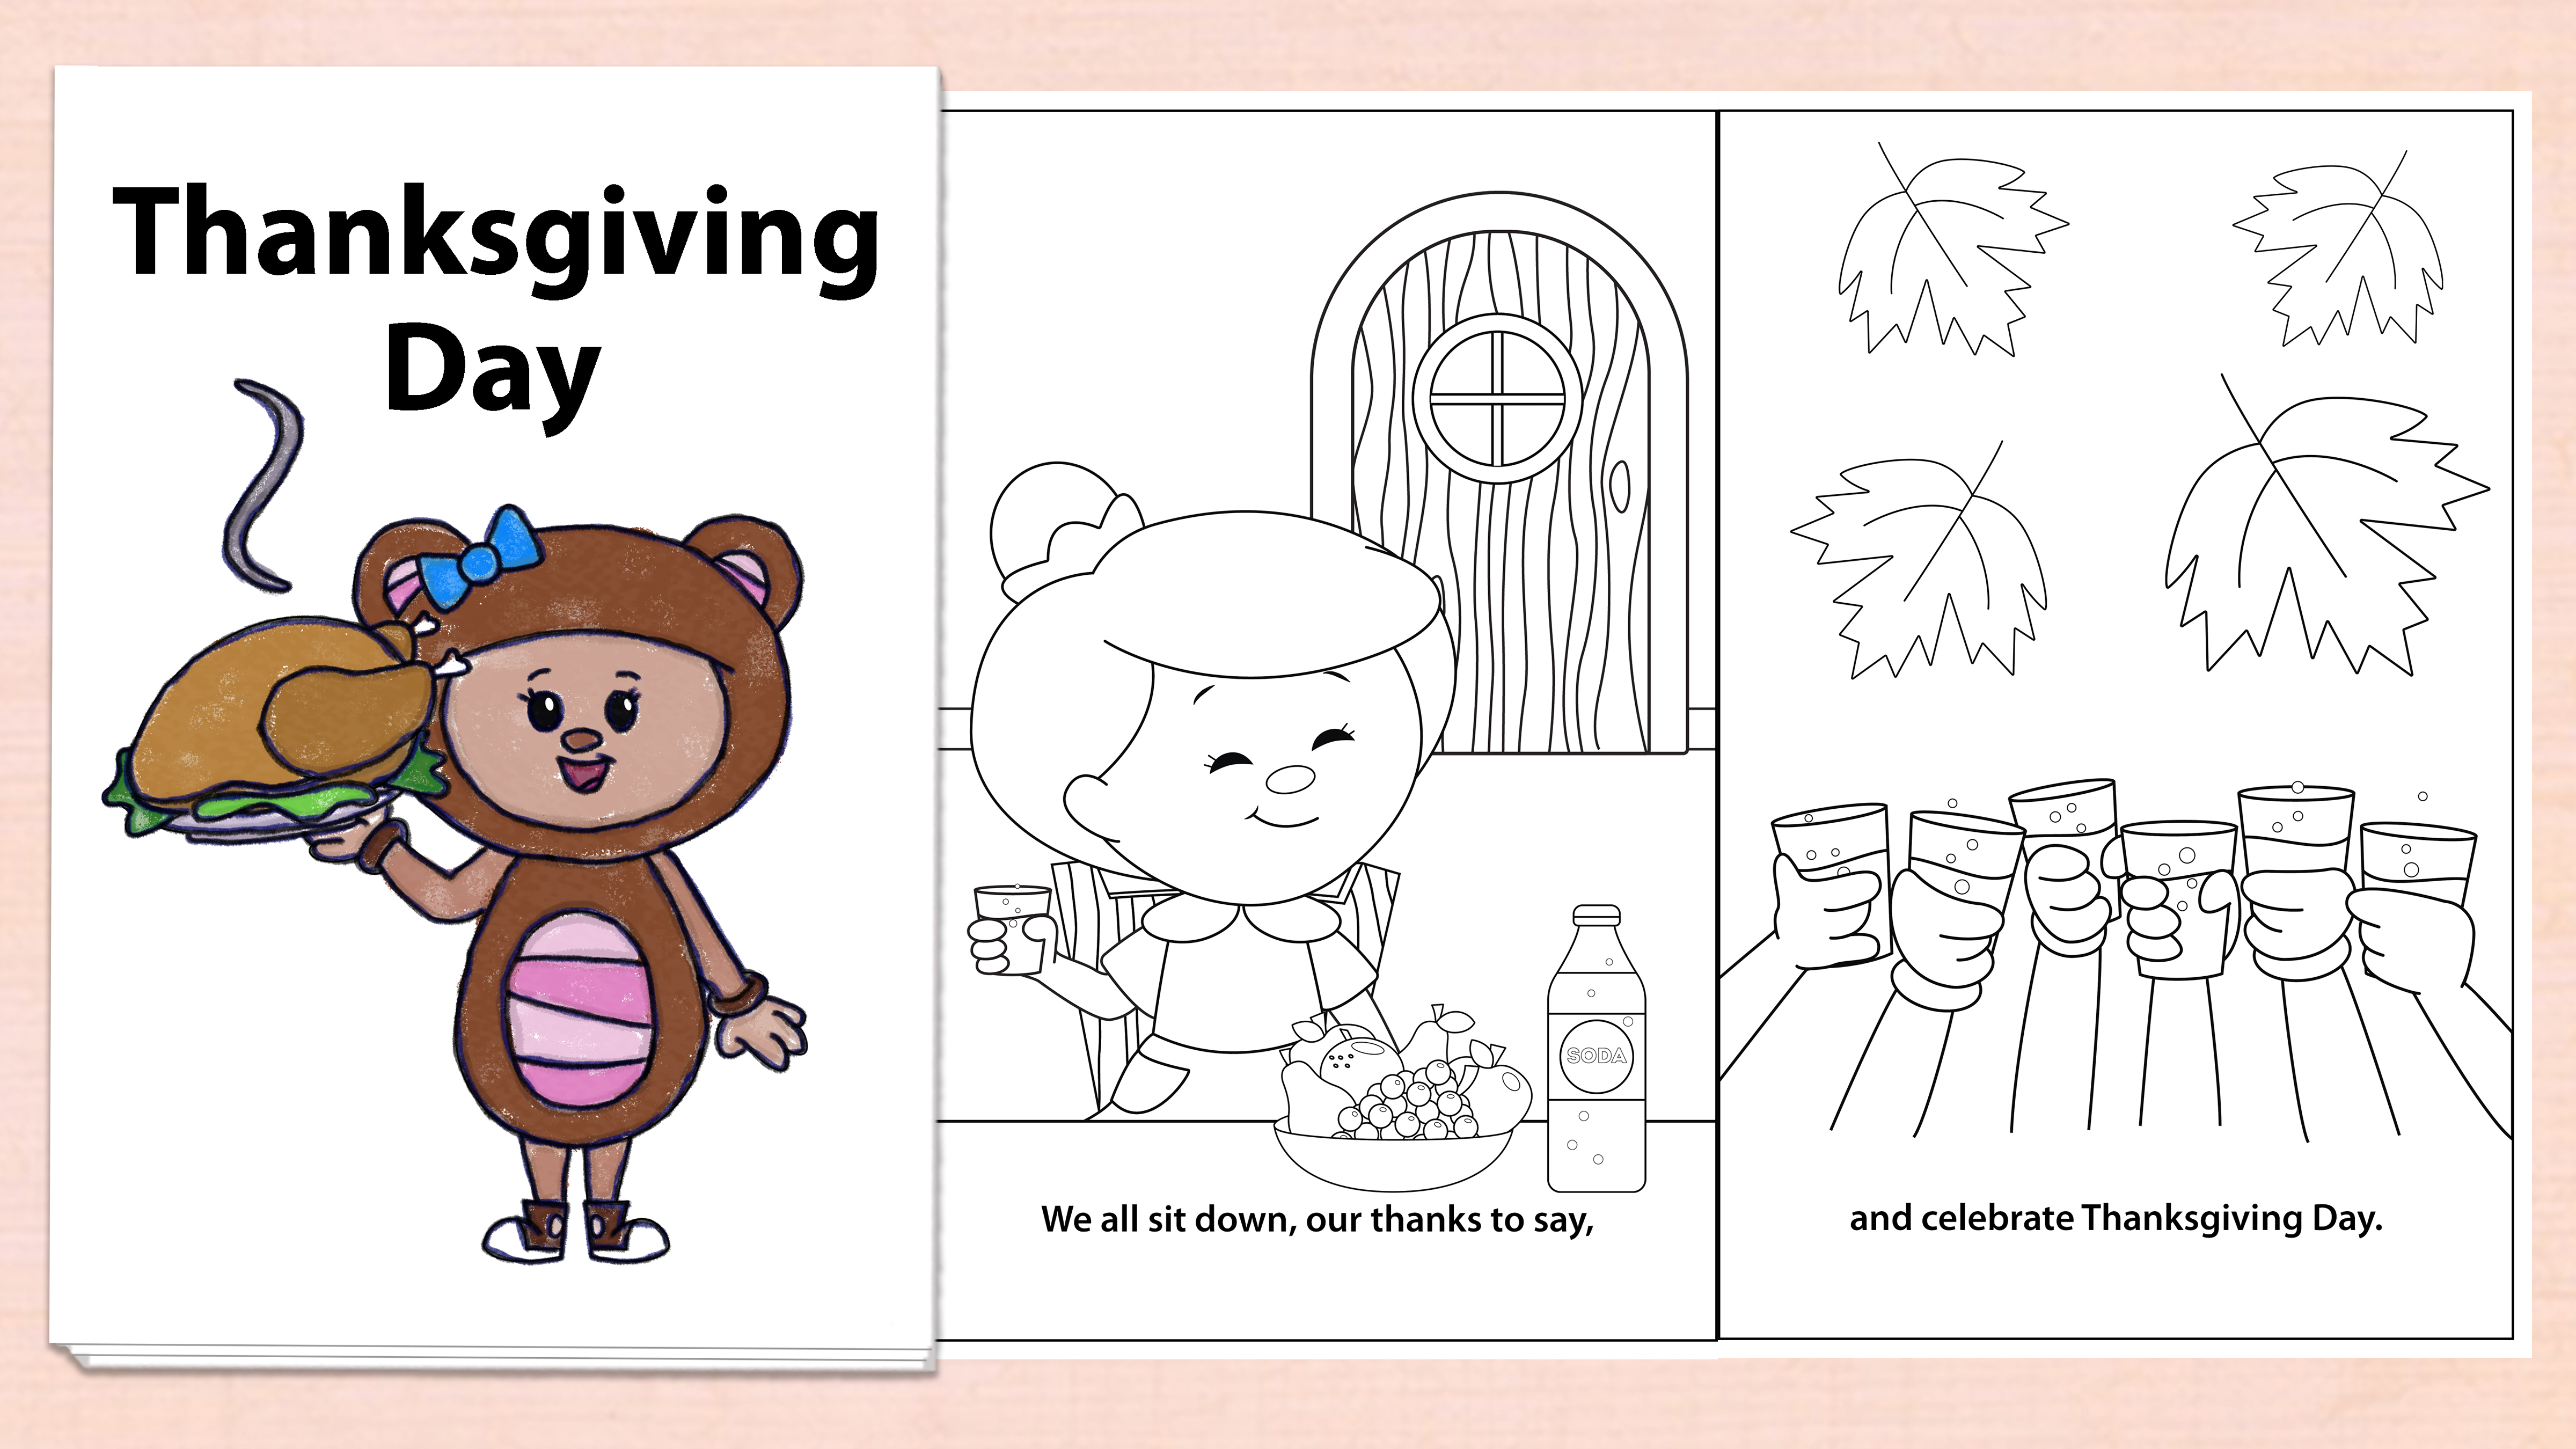 'Thanksgiving Day' Coloring Book